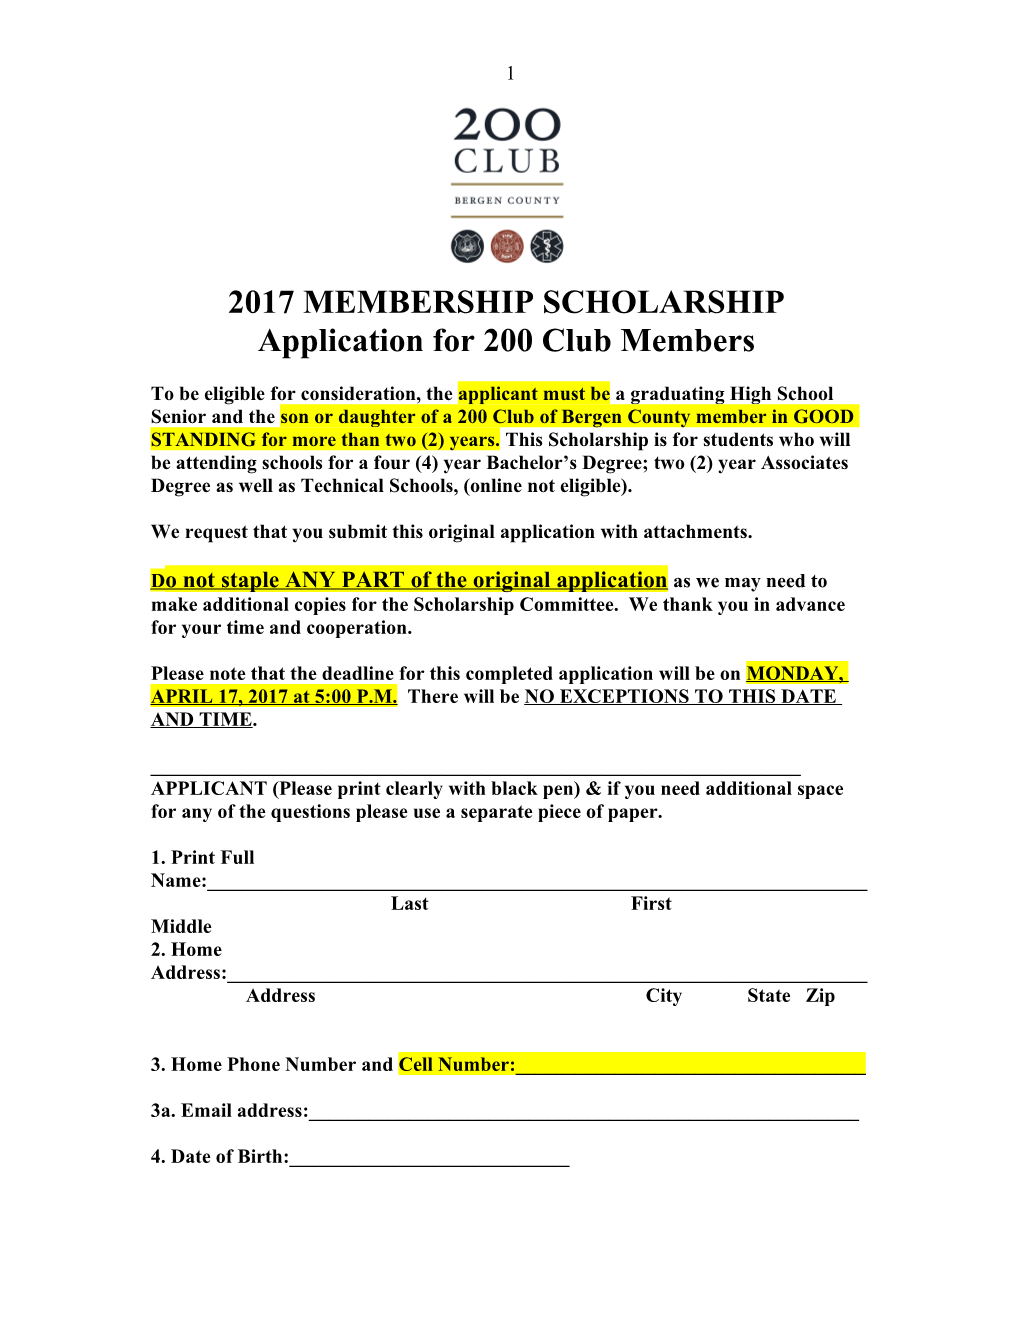 Application for 200 Club Members